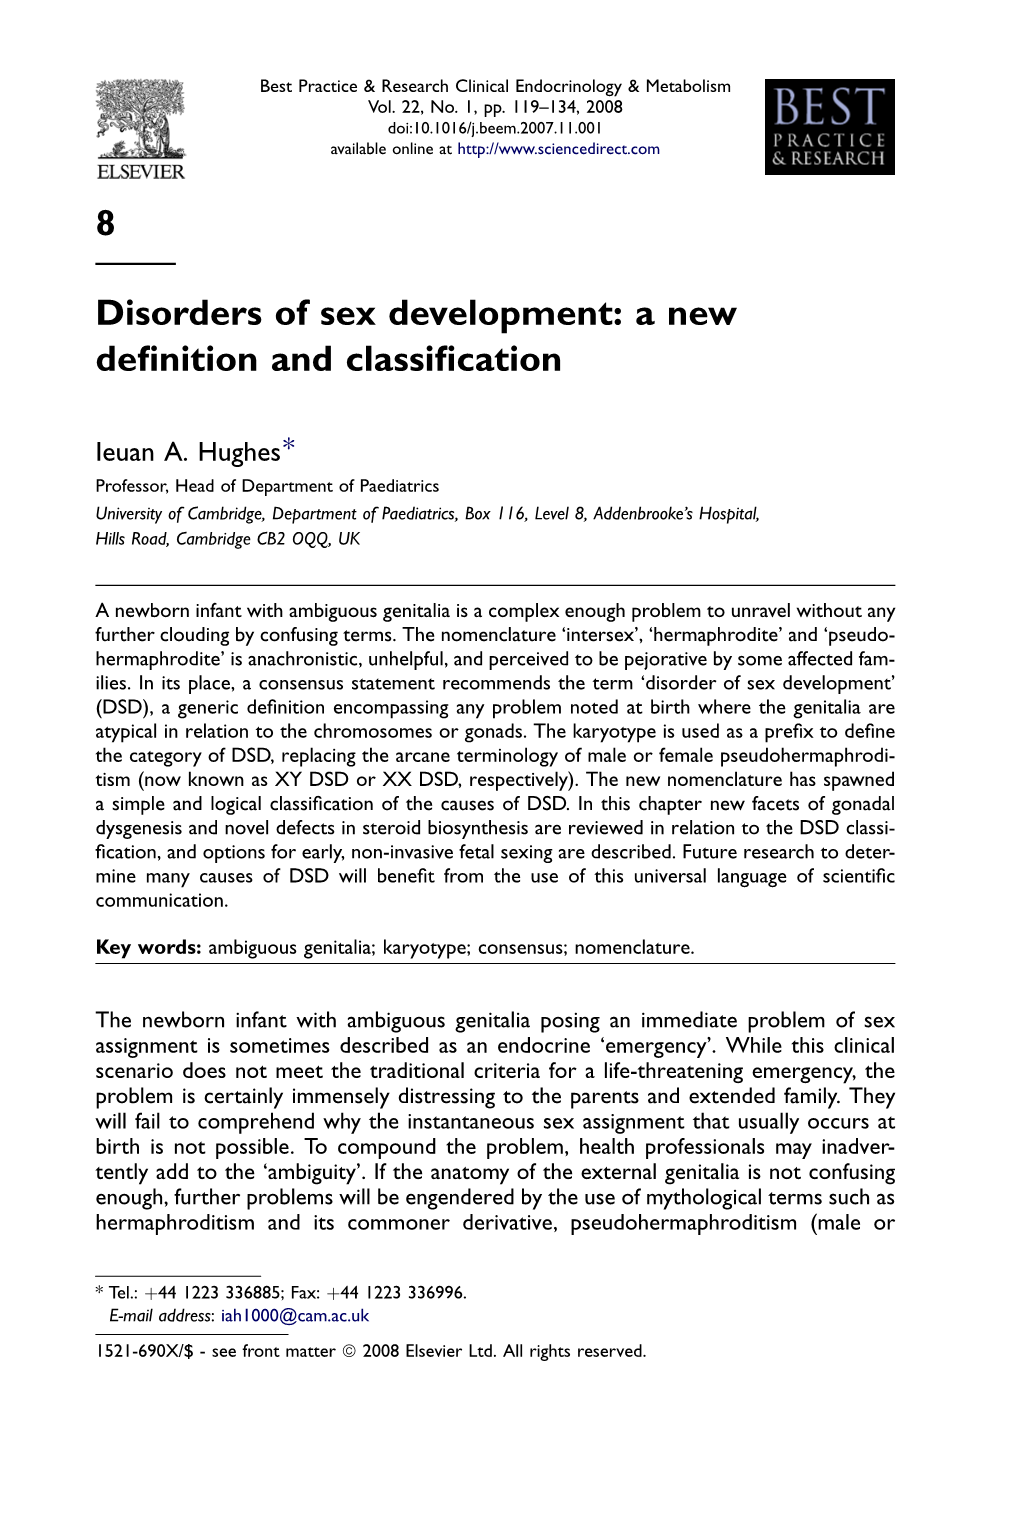 8 Disorders of Sex Development: a New Definition and Classification